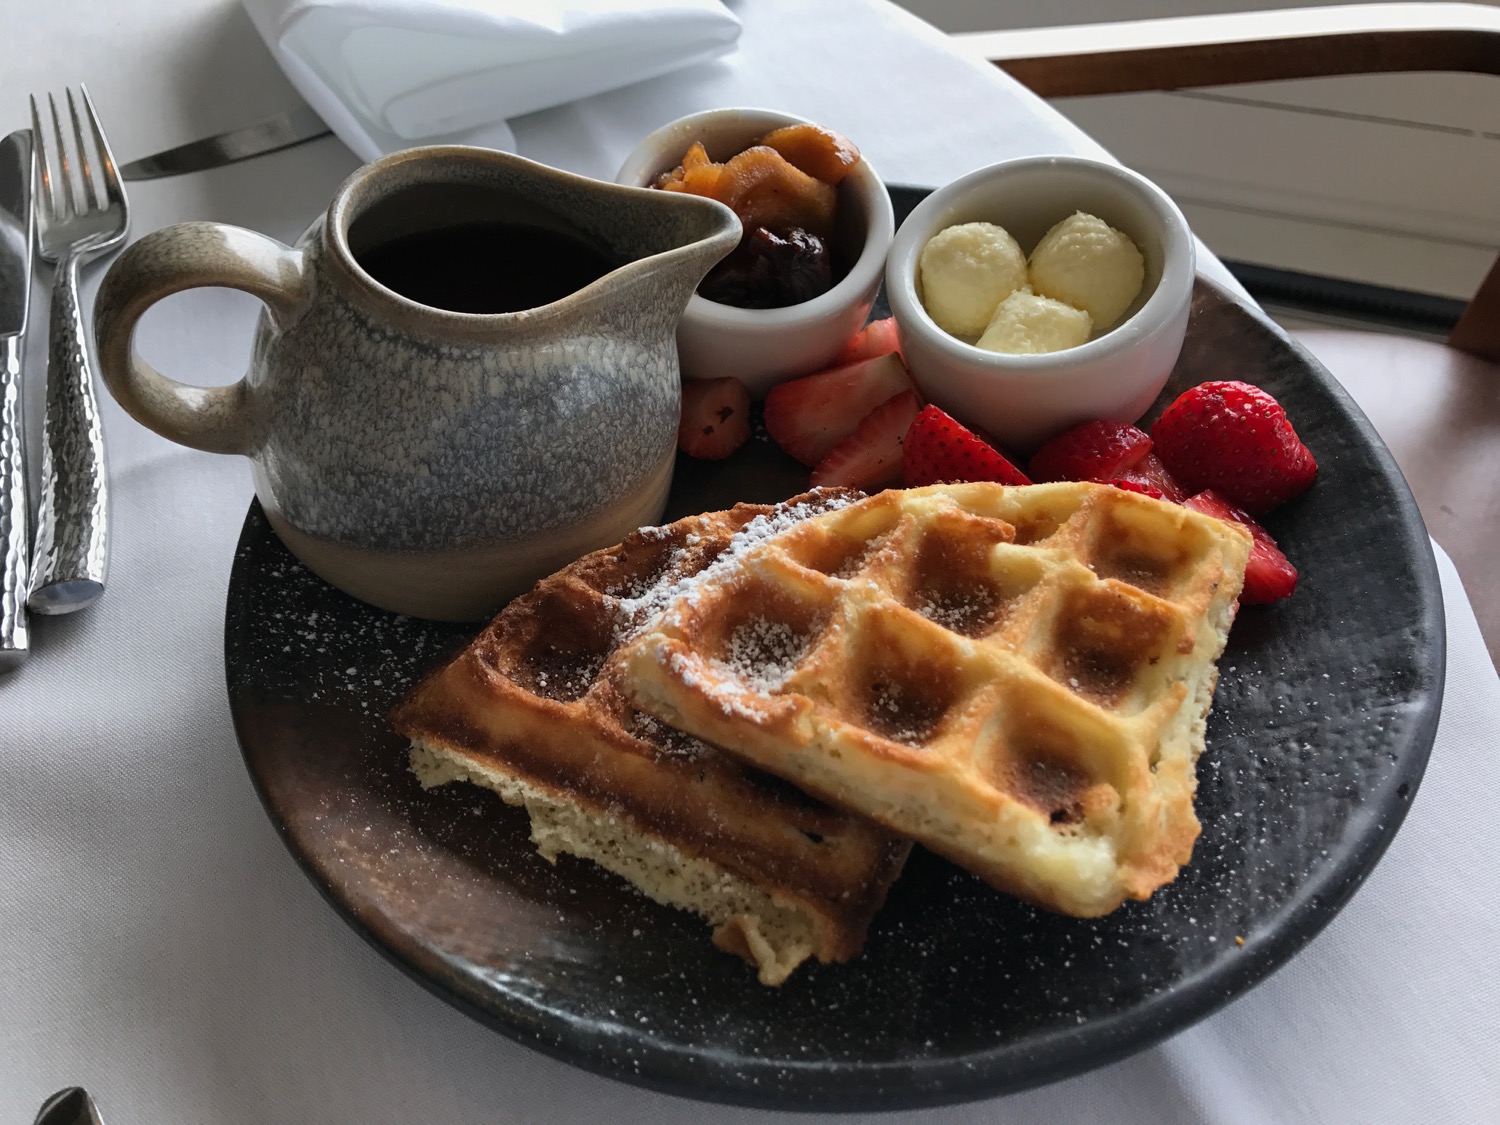 a plate of waffles and fruit